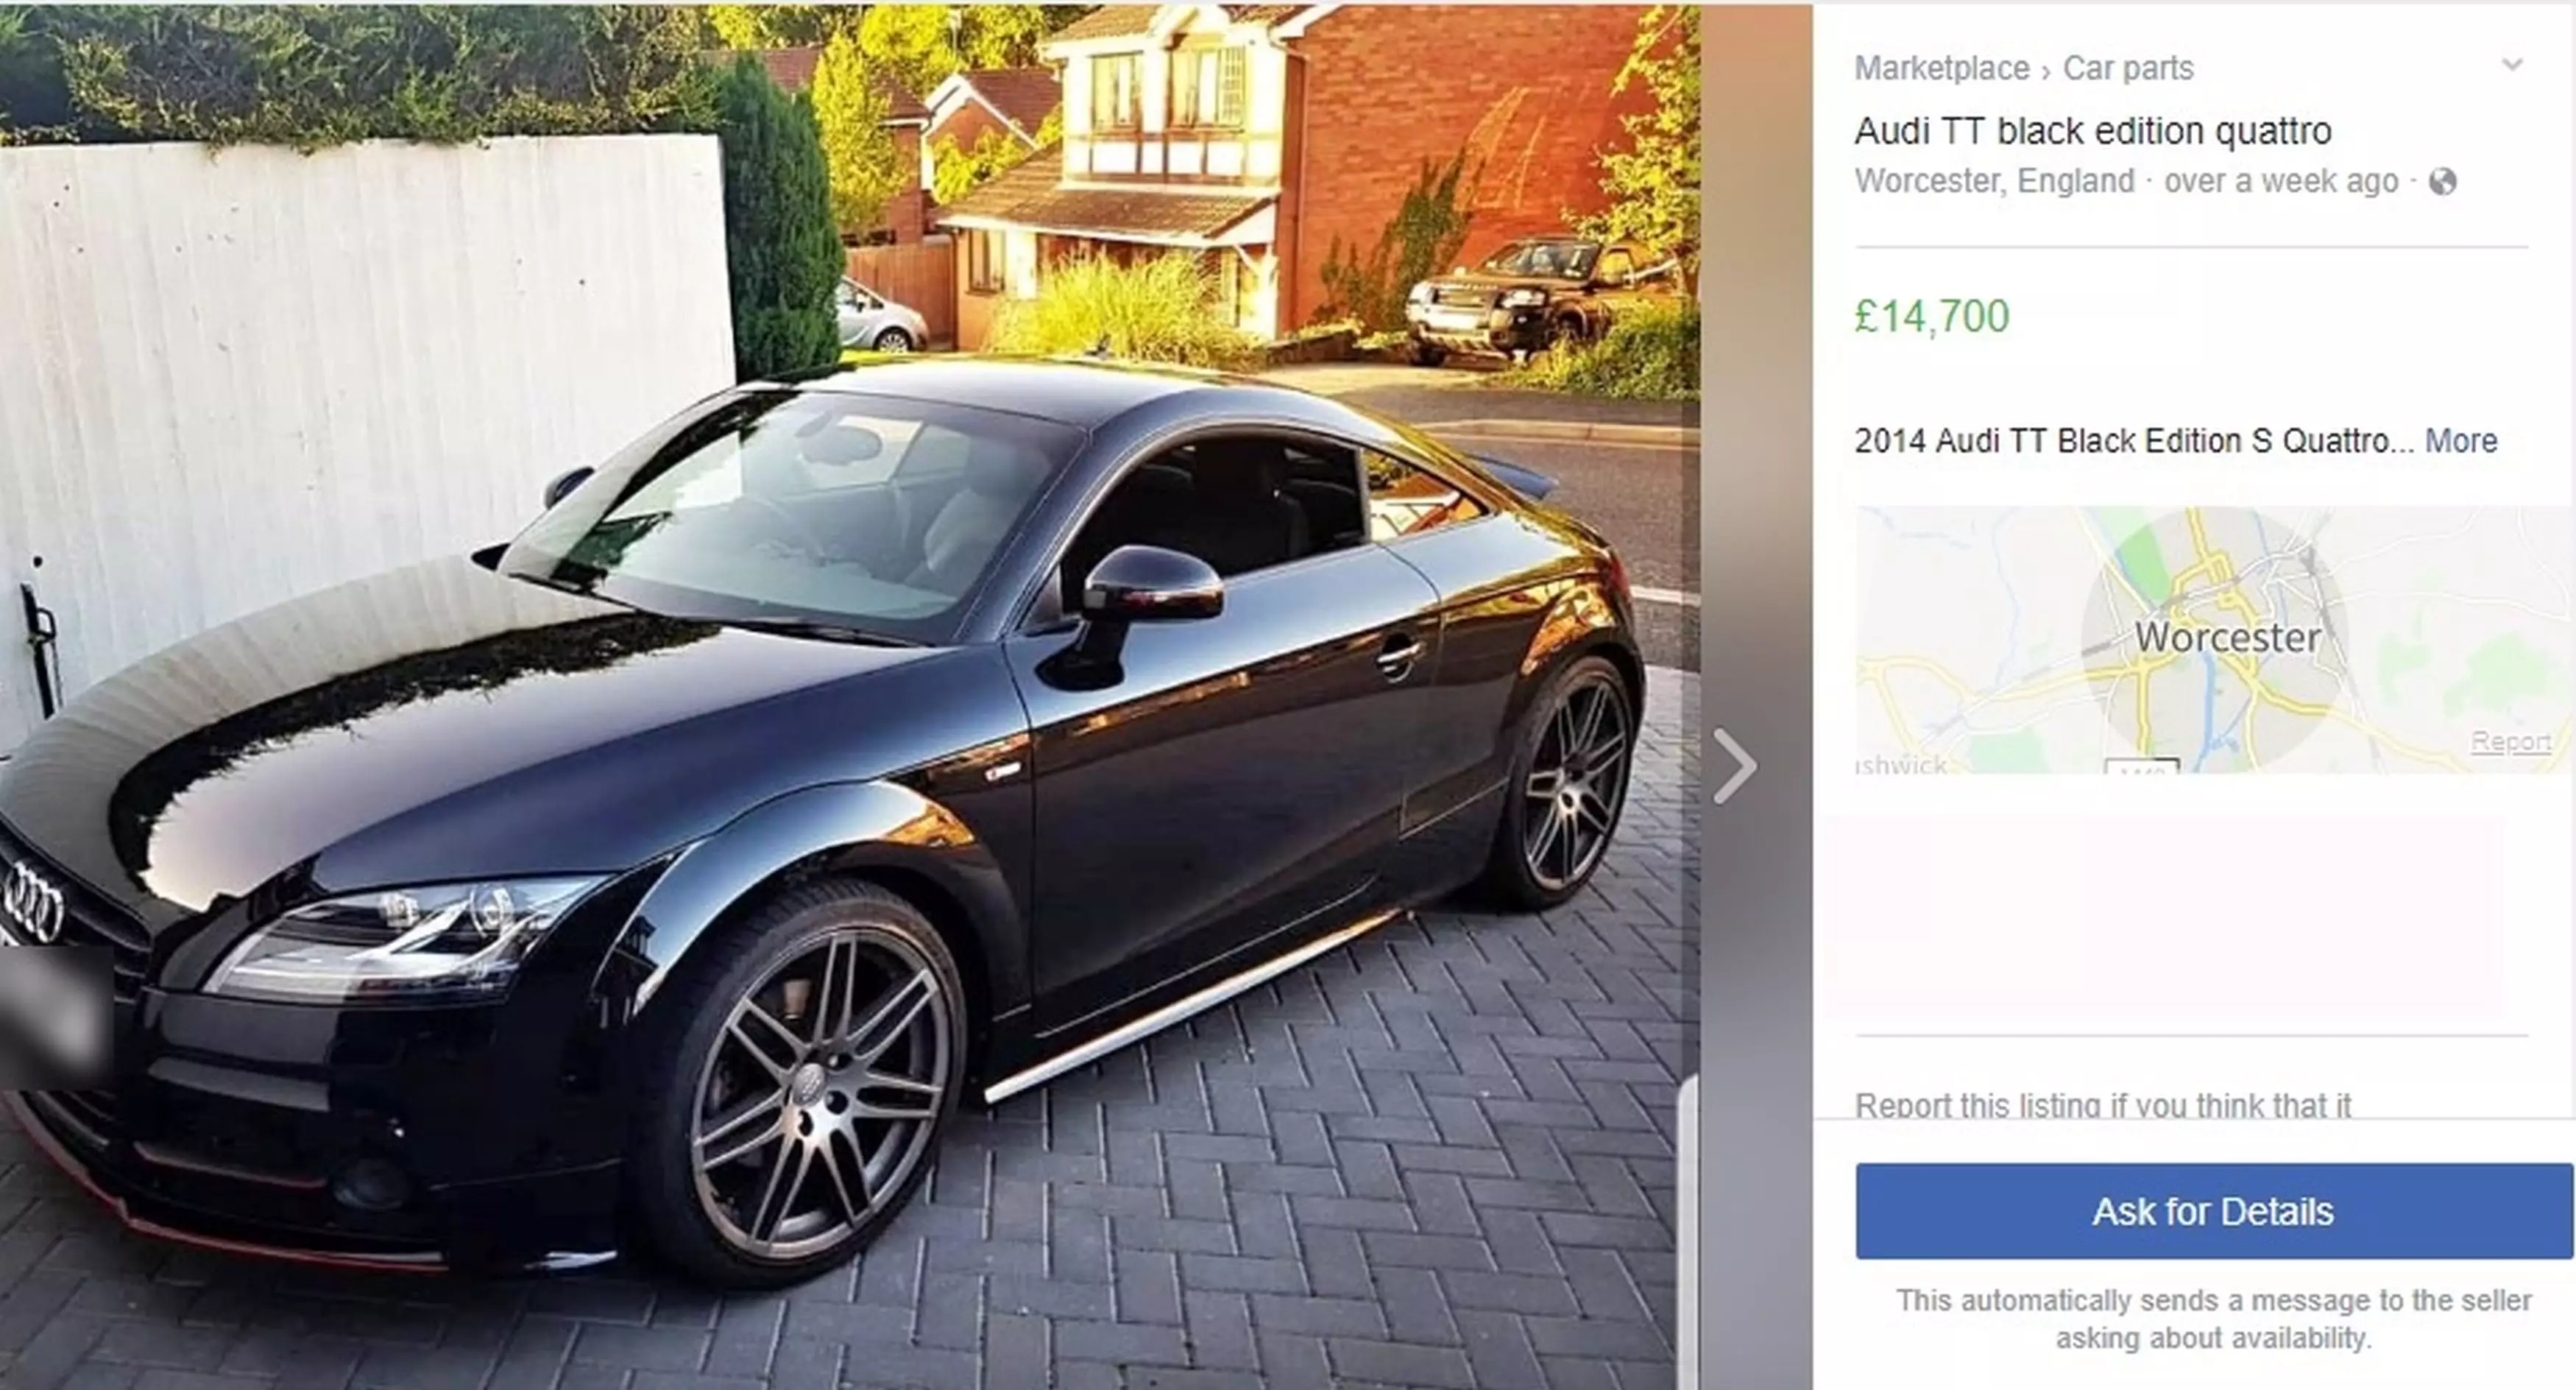 The anonymous bidder offered £9,000 less than the asking price for the Audi TT.